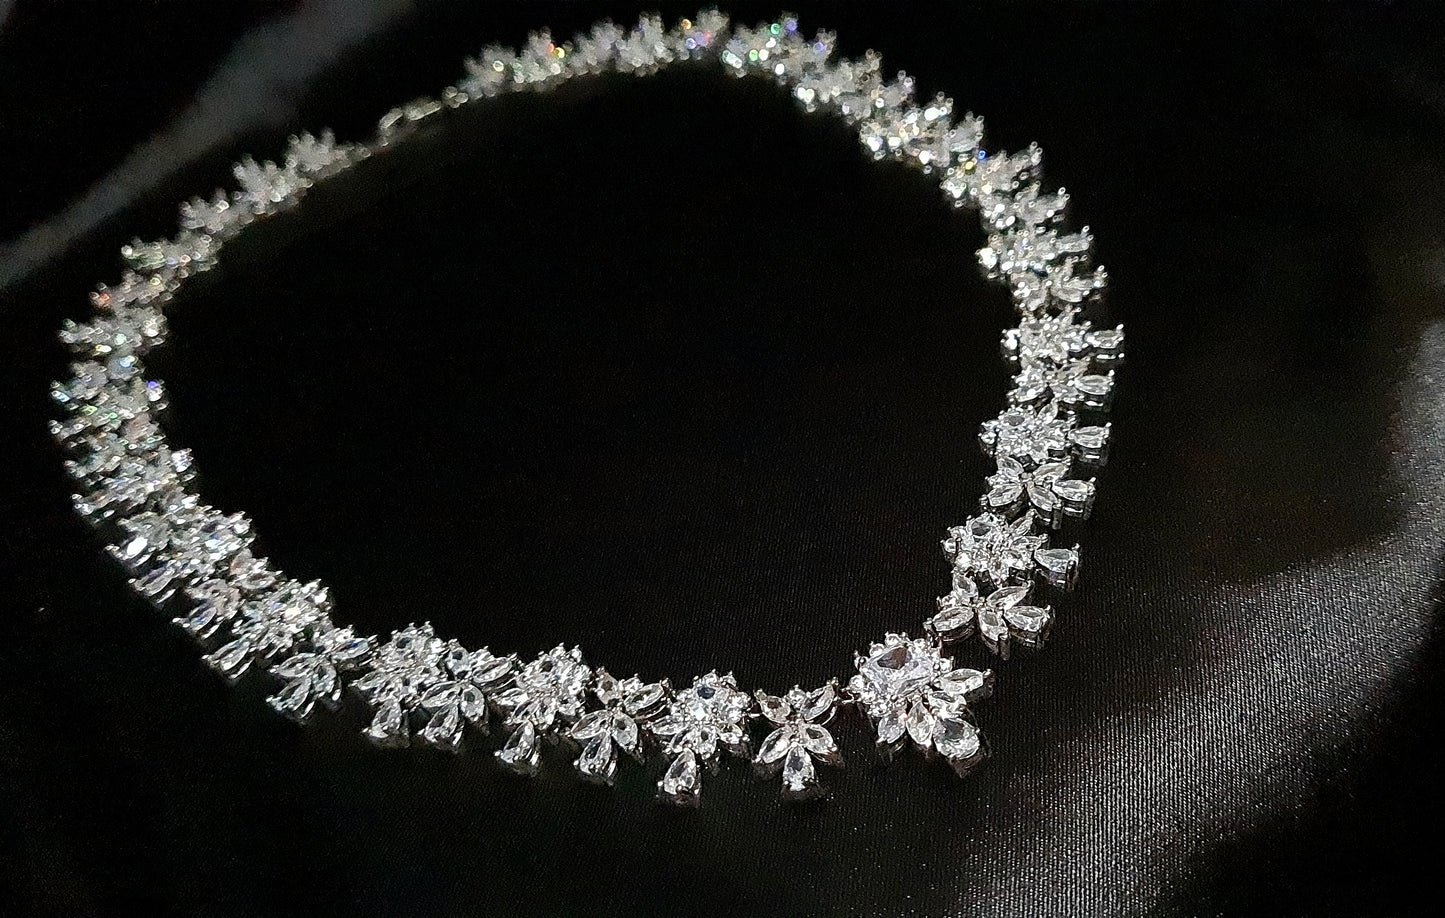 Image of a diamond necklace on a black cloth. The necklace is made up of multiple strands of diamonds, with a large pendant in the center. The diamonds are sparkling in the light, and the black cloth provides a striking contrast.